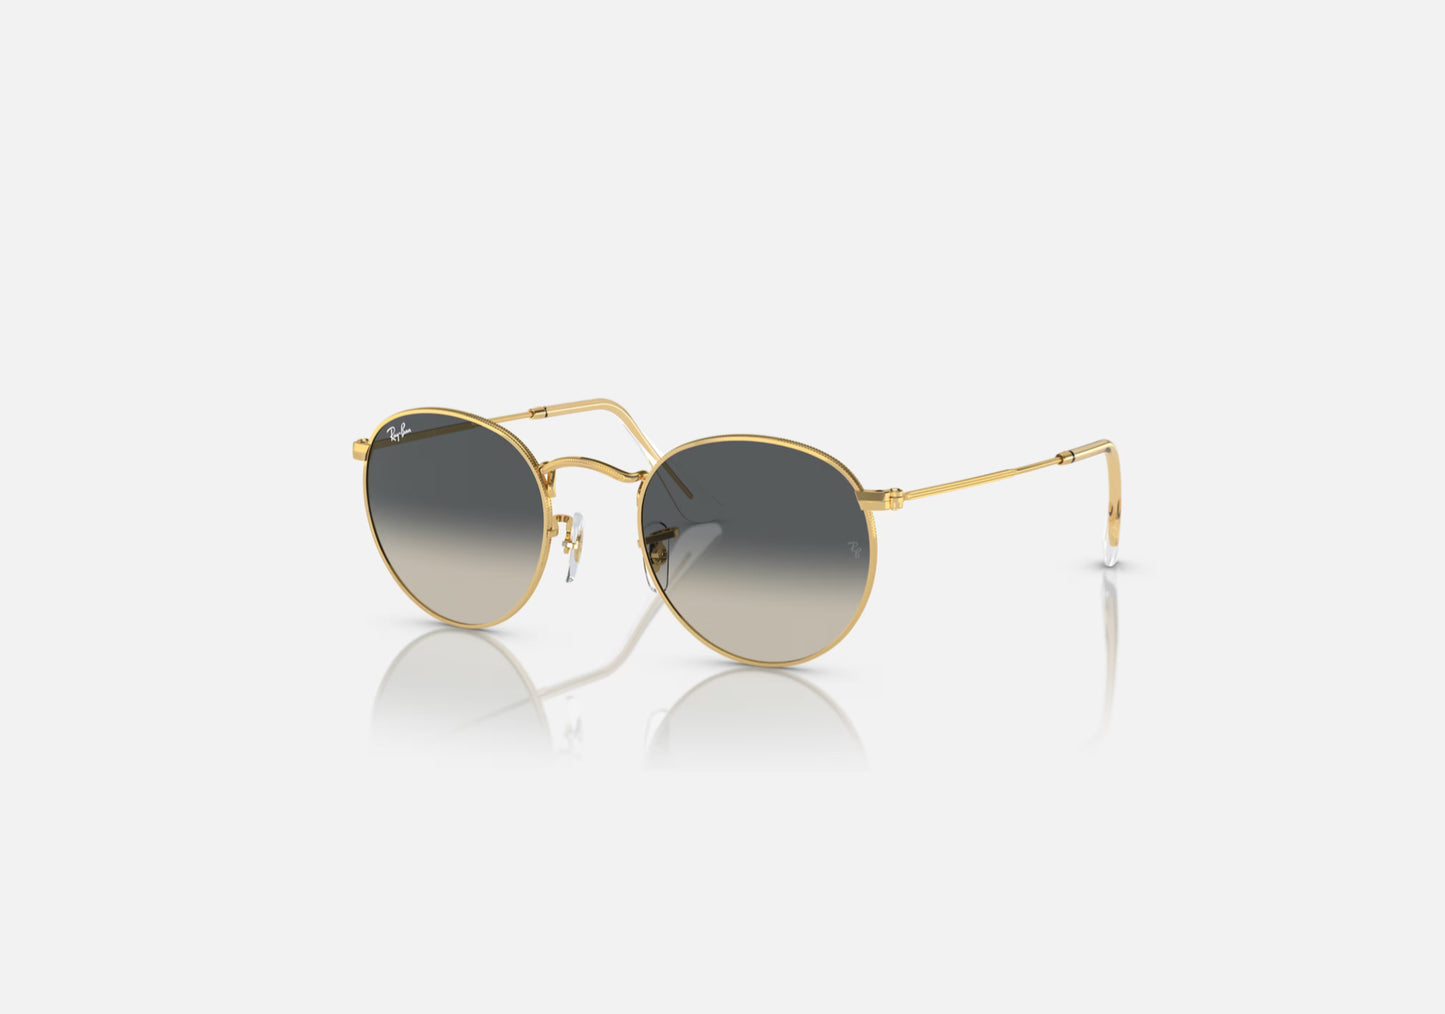 RayBan Round Metal Sunglasses Gold and Grey